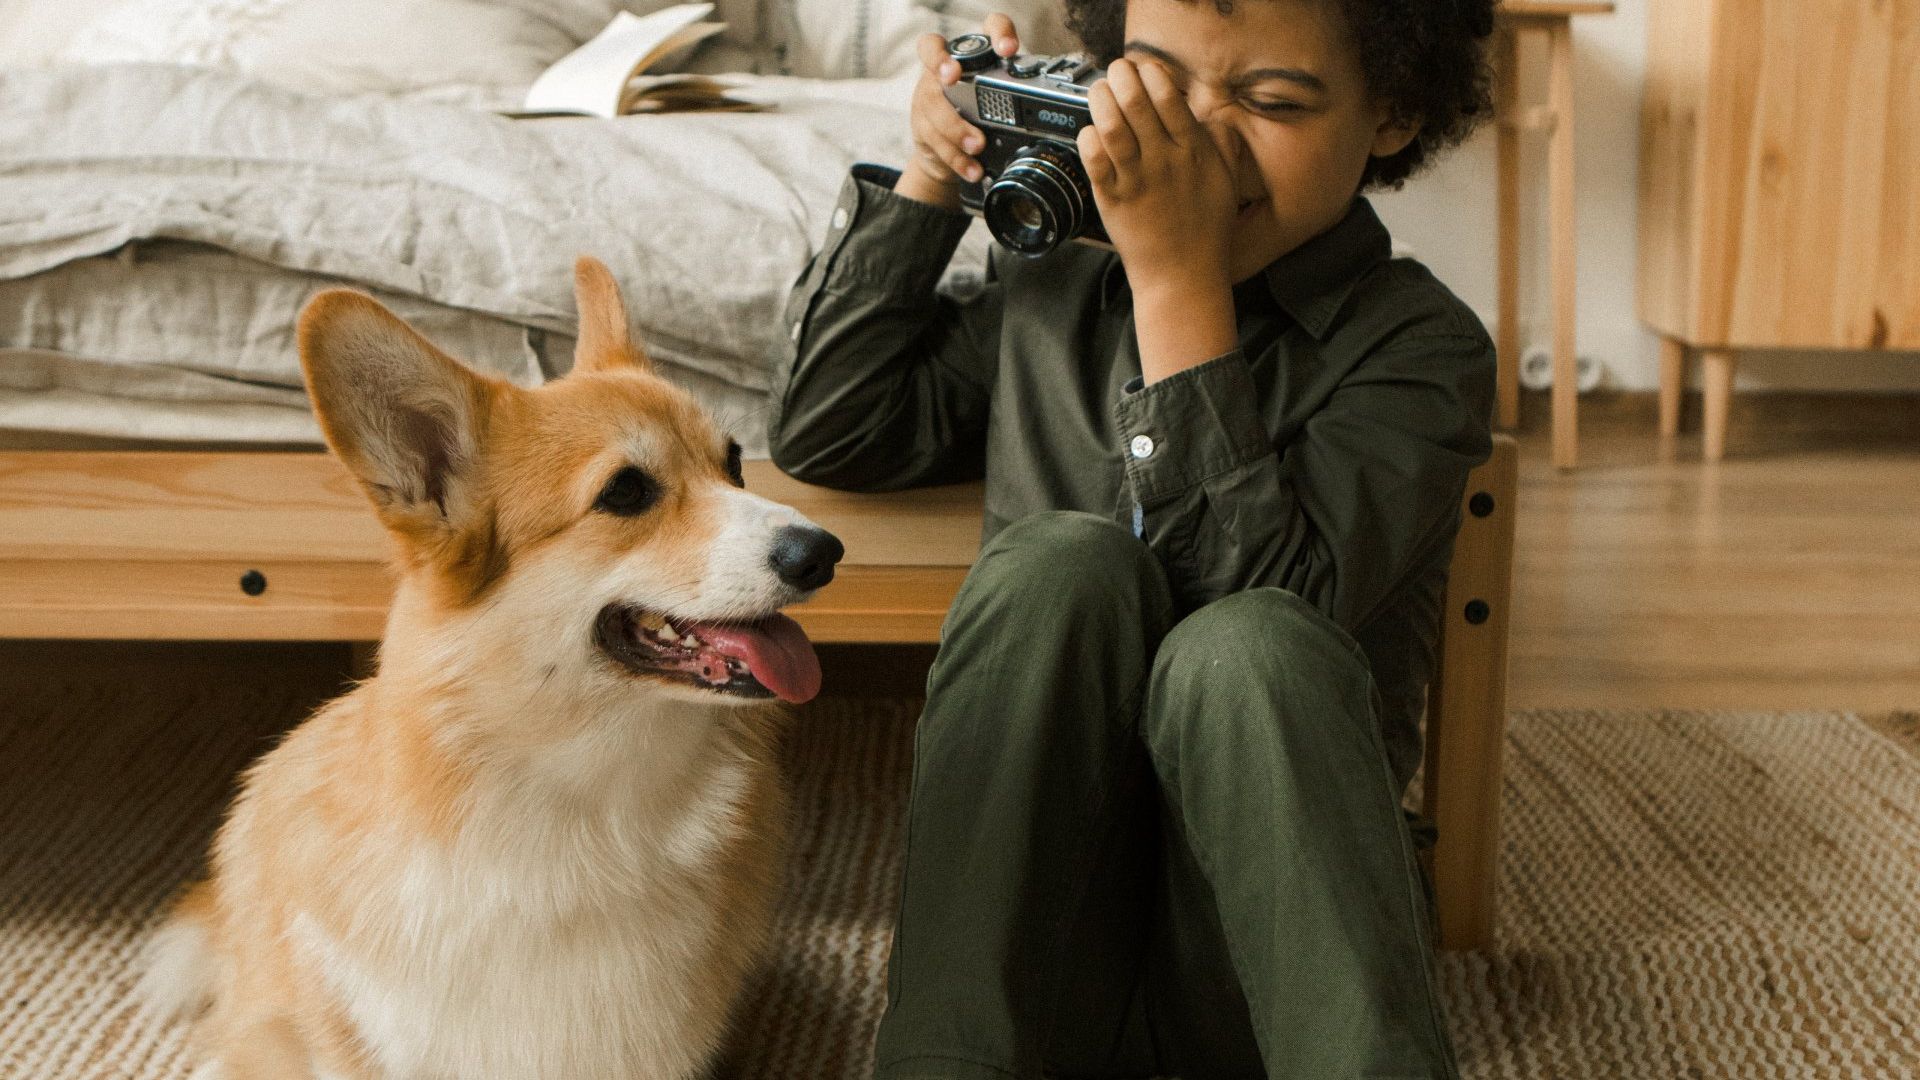 Woman taking photo of a dog inside the bedroom